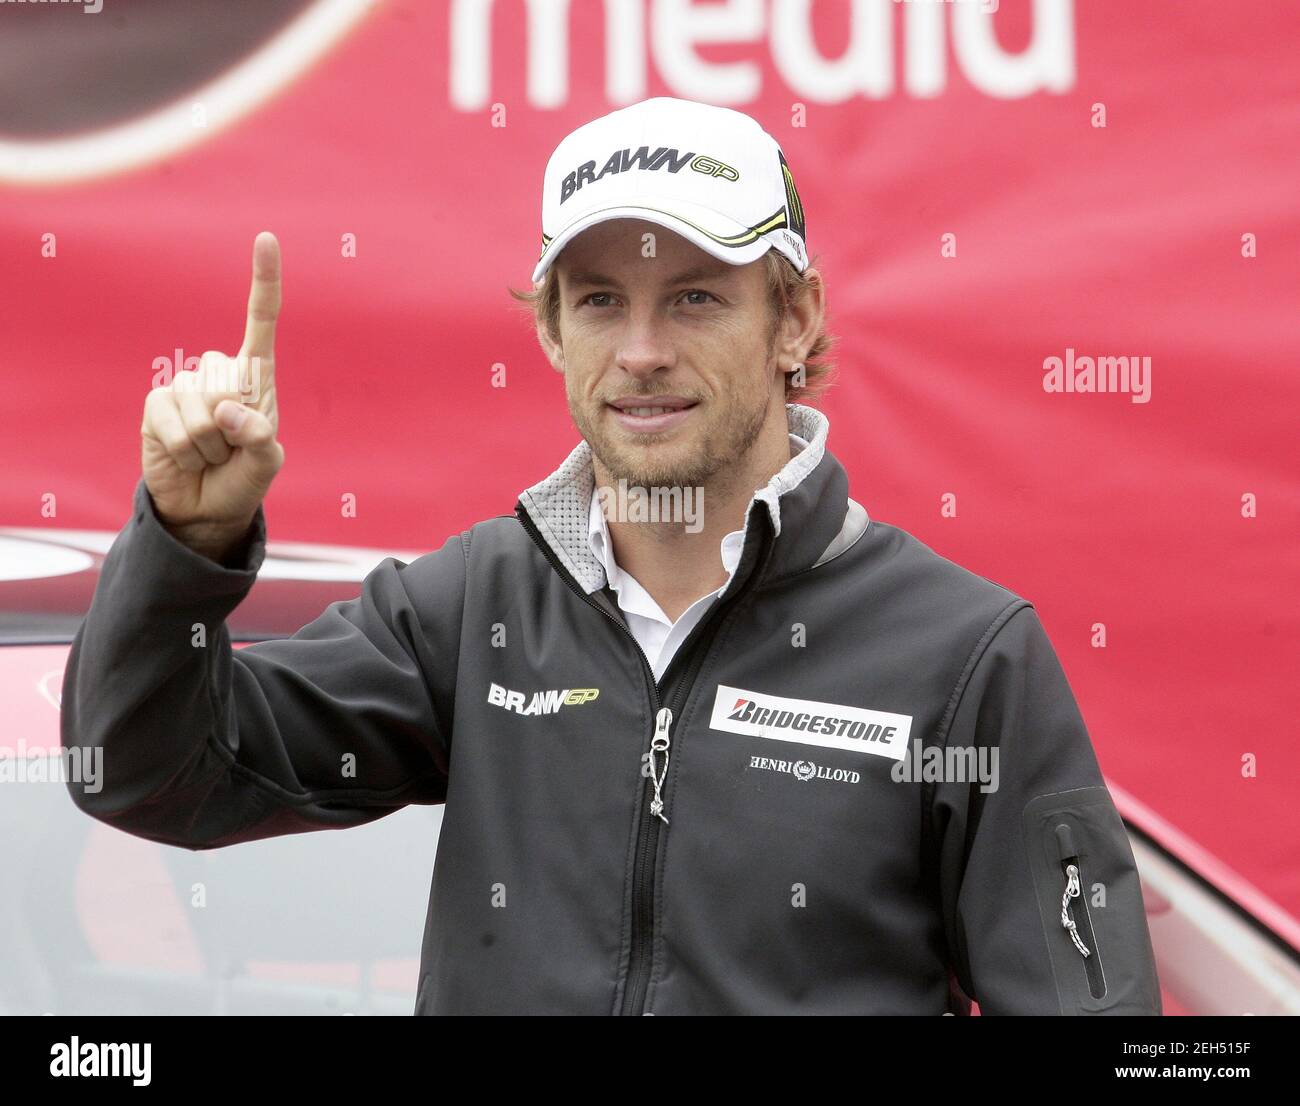 Formula One - F1 - Formula One World Champion Jenson Button celebrates Virgin Media's SpeedWeek50 at Bluewater - Bluewater, Greenhithe, Kent, DA9 9ST - 20/10/09  New Formula One World Champion Jenson Button at the Virgin Media's Speed Week 50 at Bluewater  Mandatory Credit: Action Images / Matthew Childs  Livepic Stock Photo